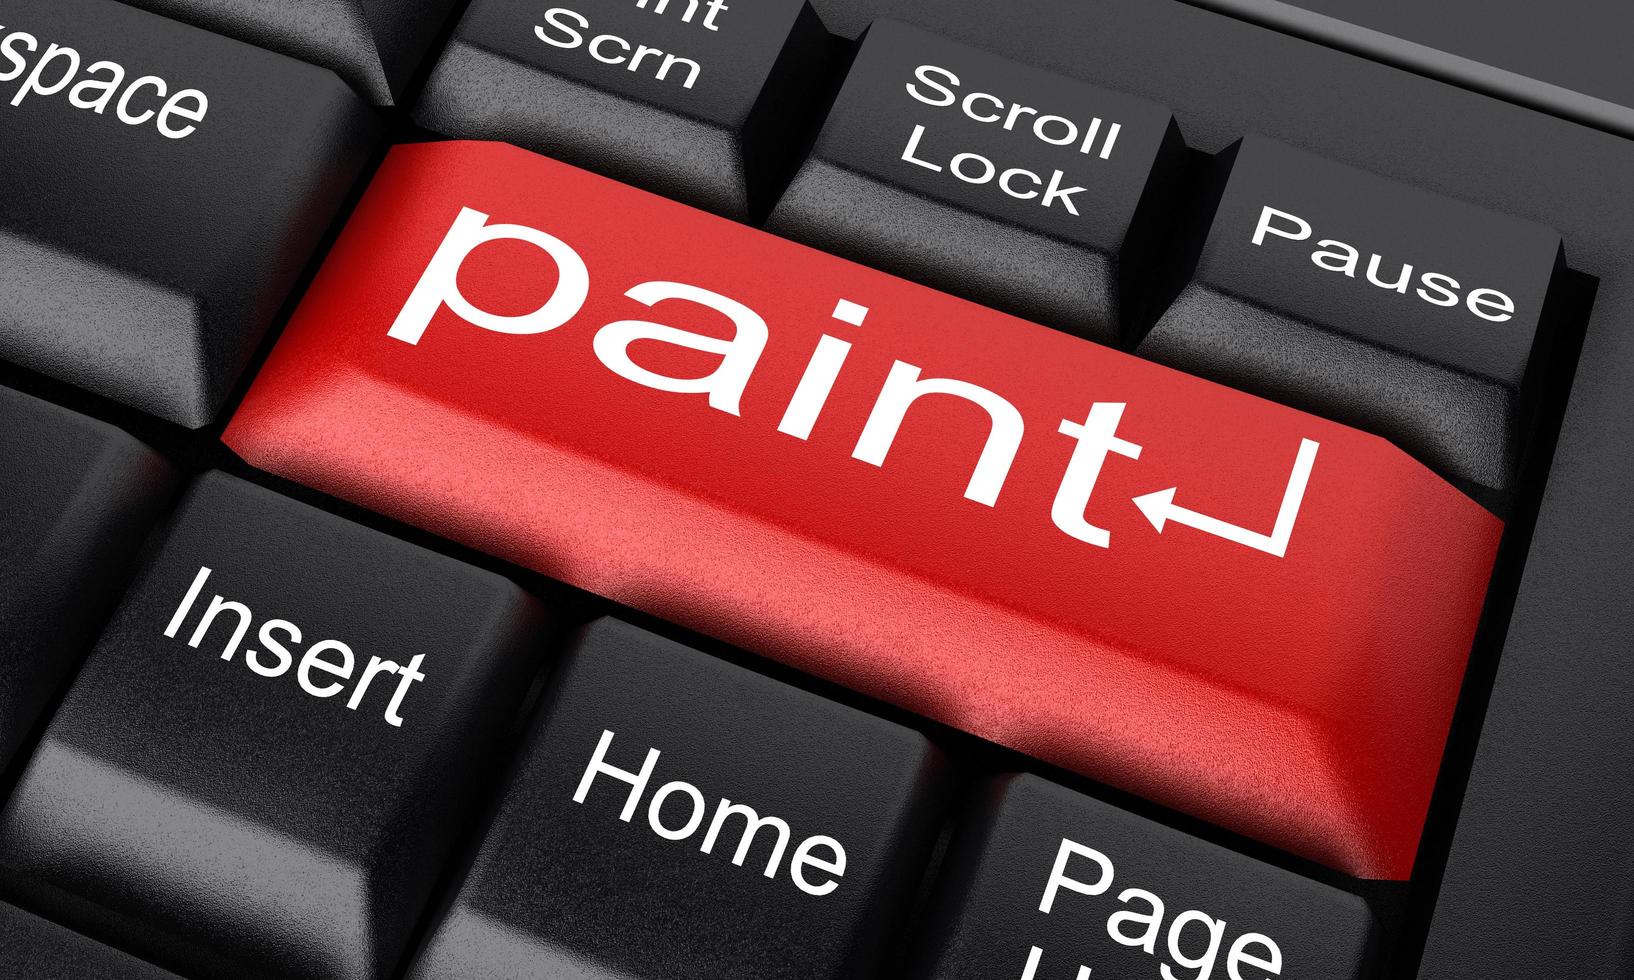 paint word on red keyboard button photo